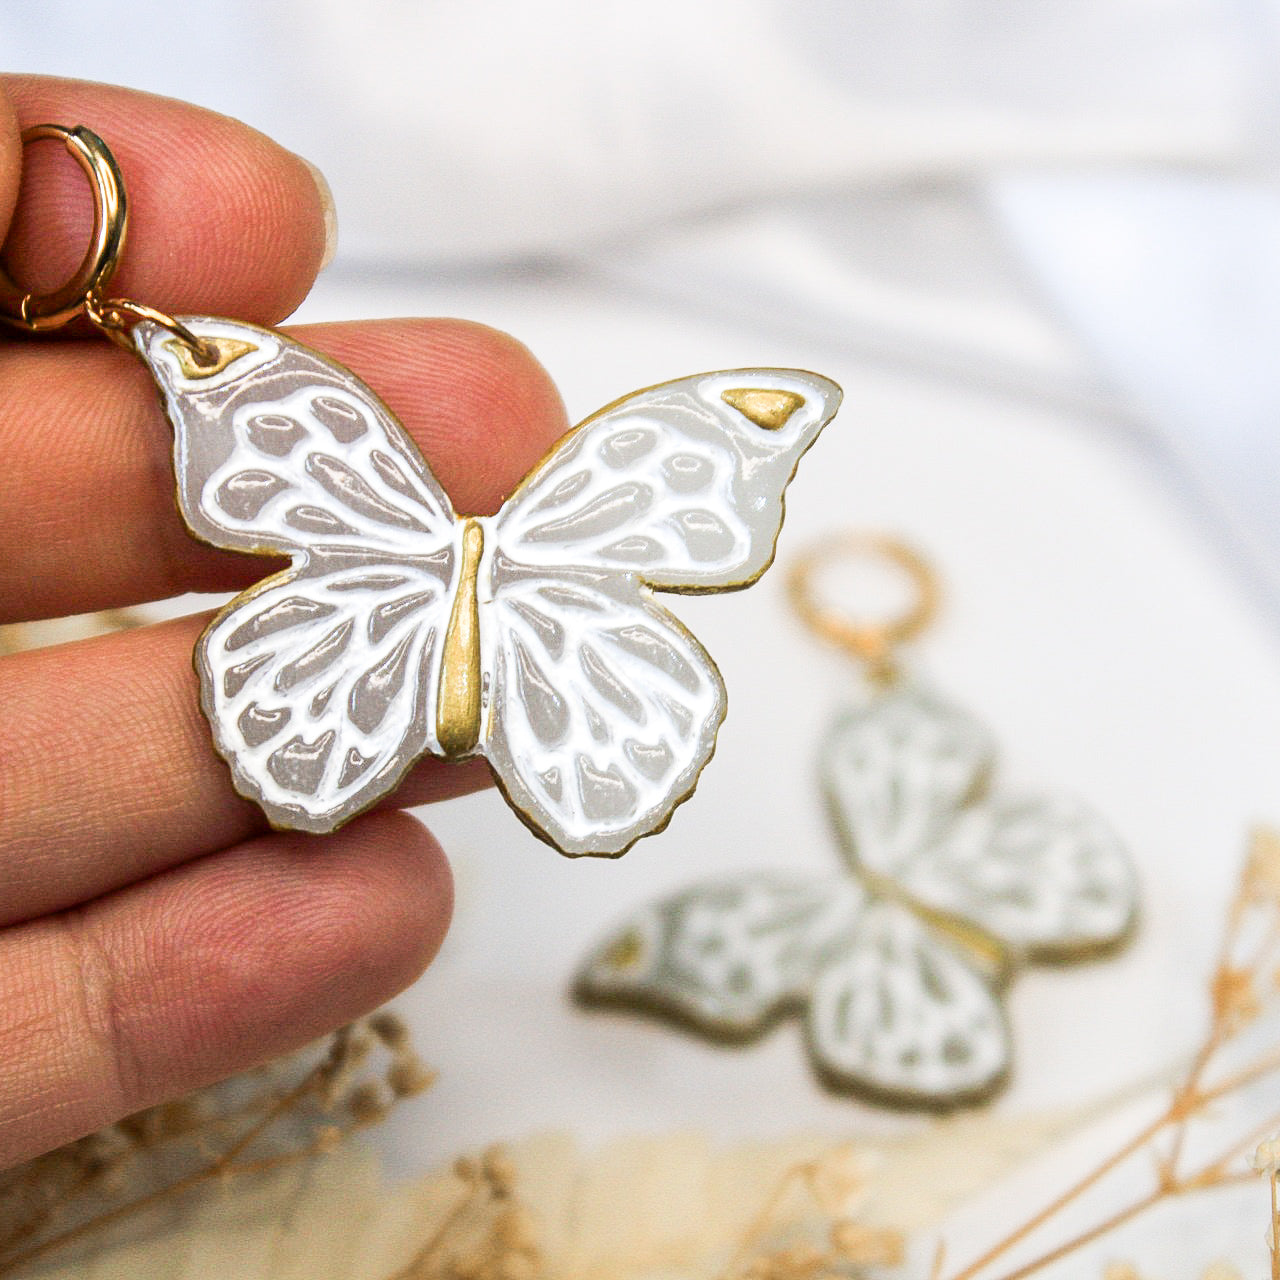 Handmade butterfly earrings – perfect gift for nature lovers